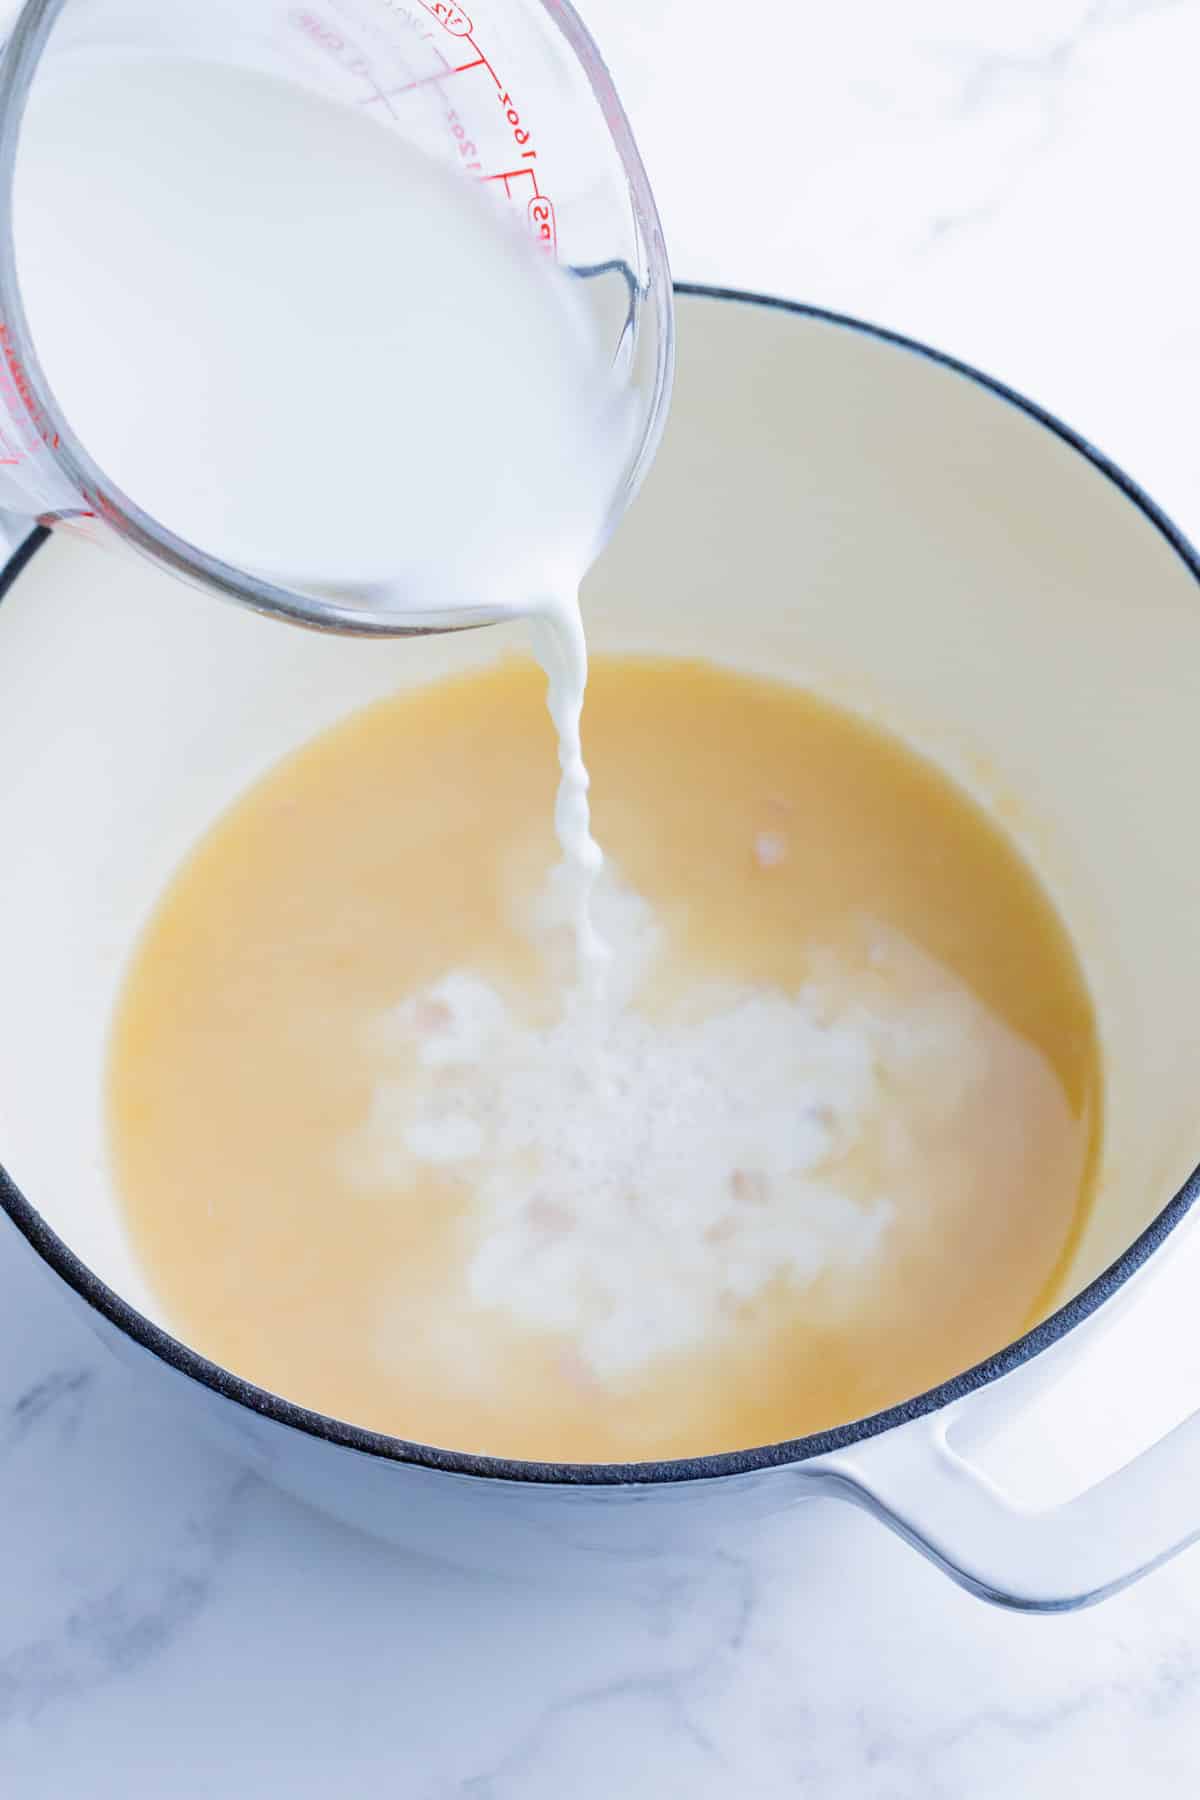 Milk is added to the mac and cheese base.